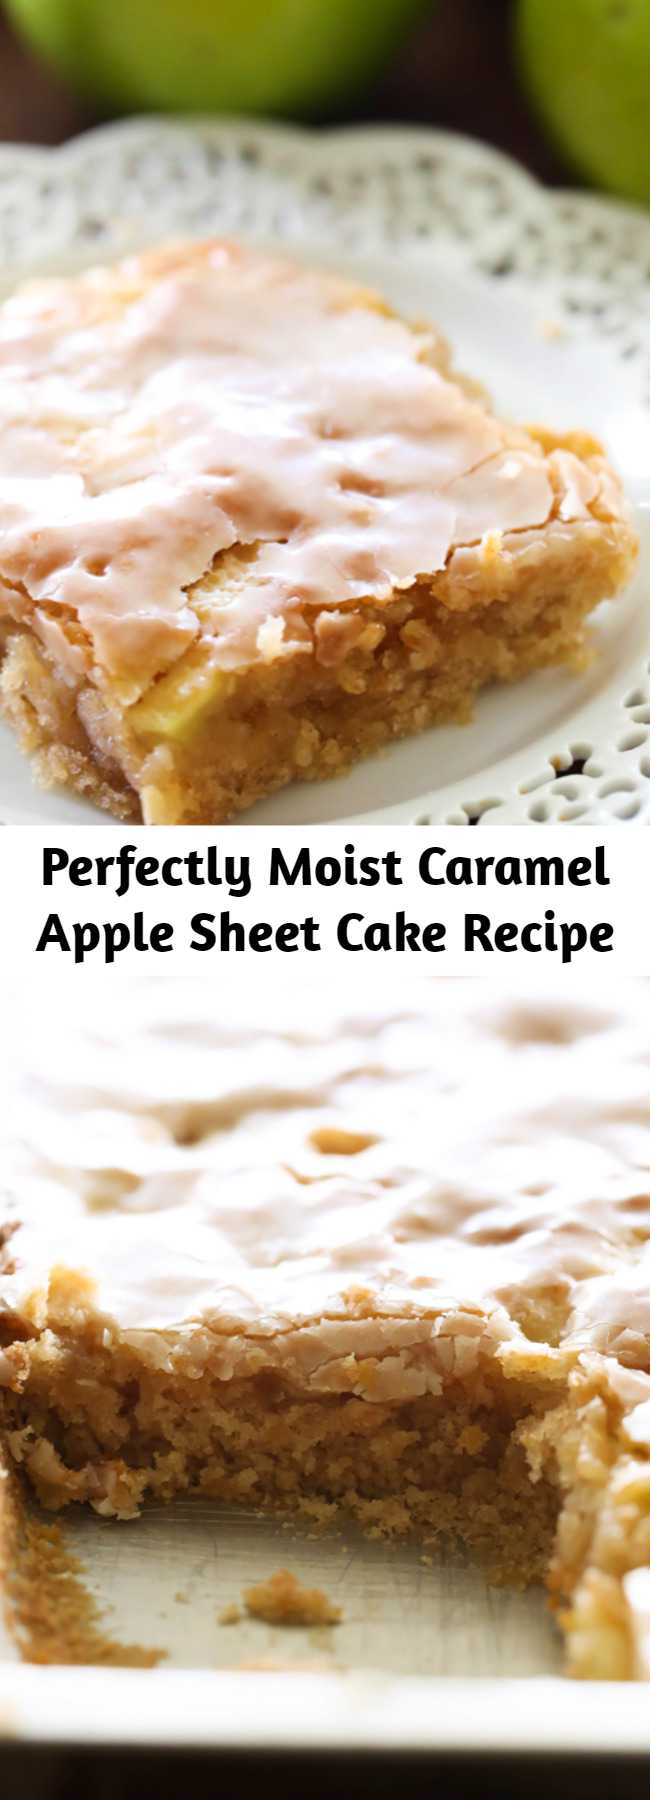 Perfectly Moist Caramel Apple Sheet Cake Recipe - This delicious apple cake is perfectly moist and has caramel frosting infused in each and every bite! It is heavenly!